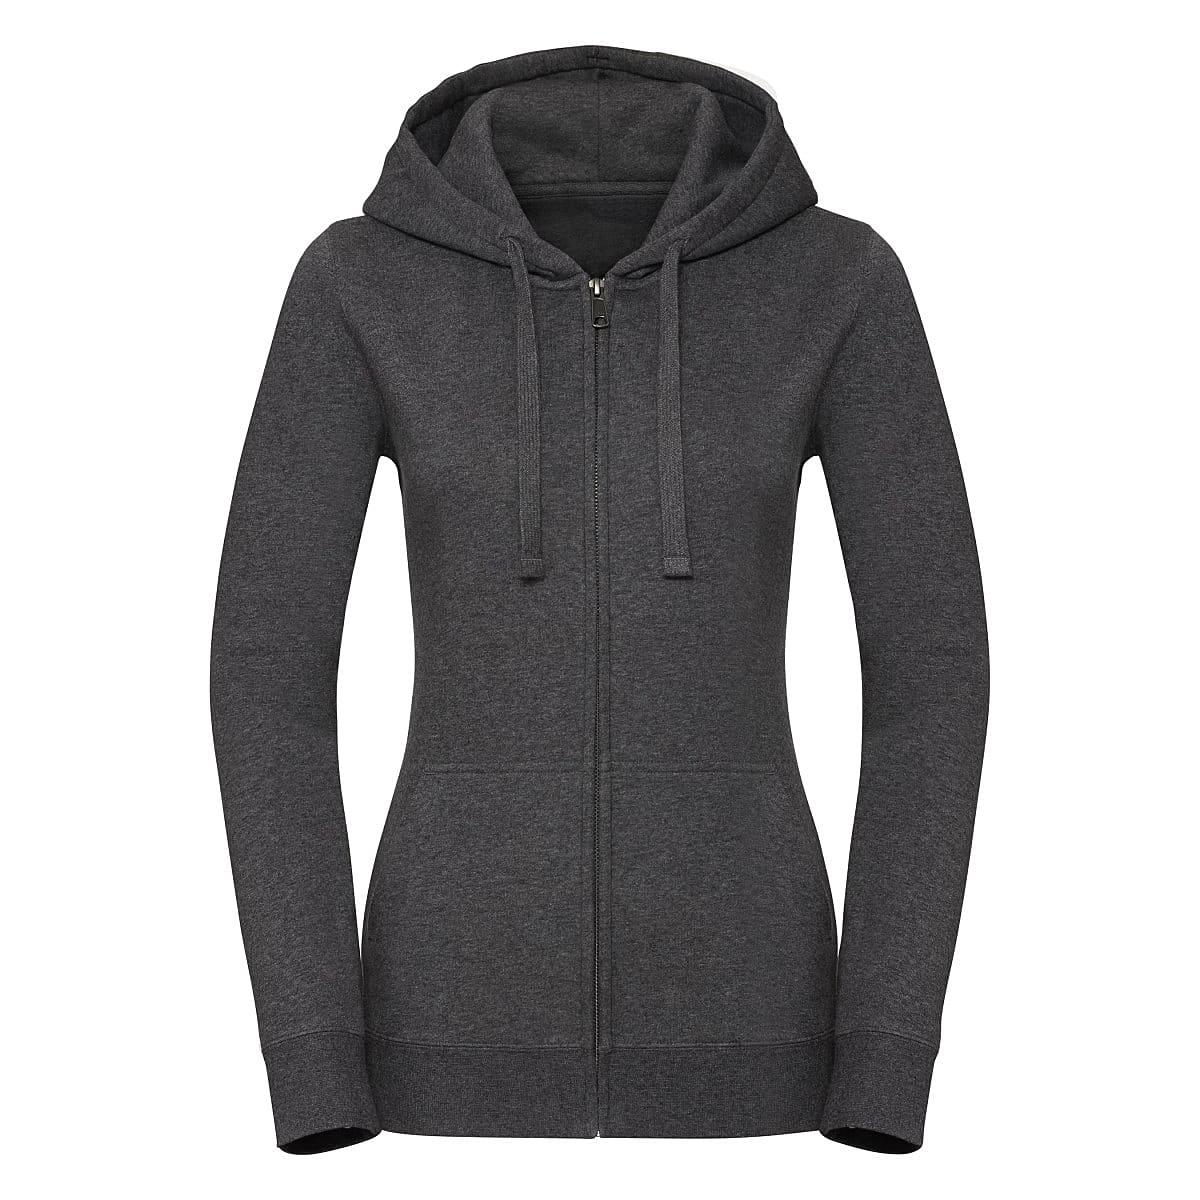 Russell Womens Authentic Melange Zipped Hoodie in Carbon Melange (Product Code: R263F)